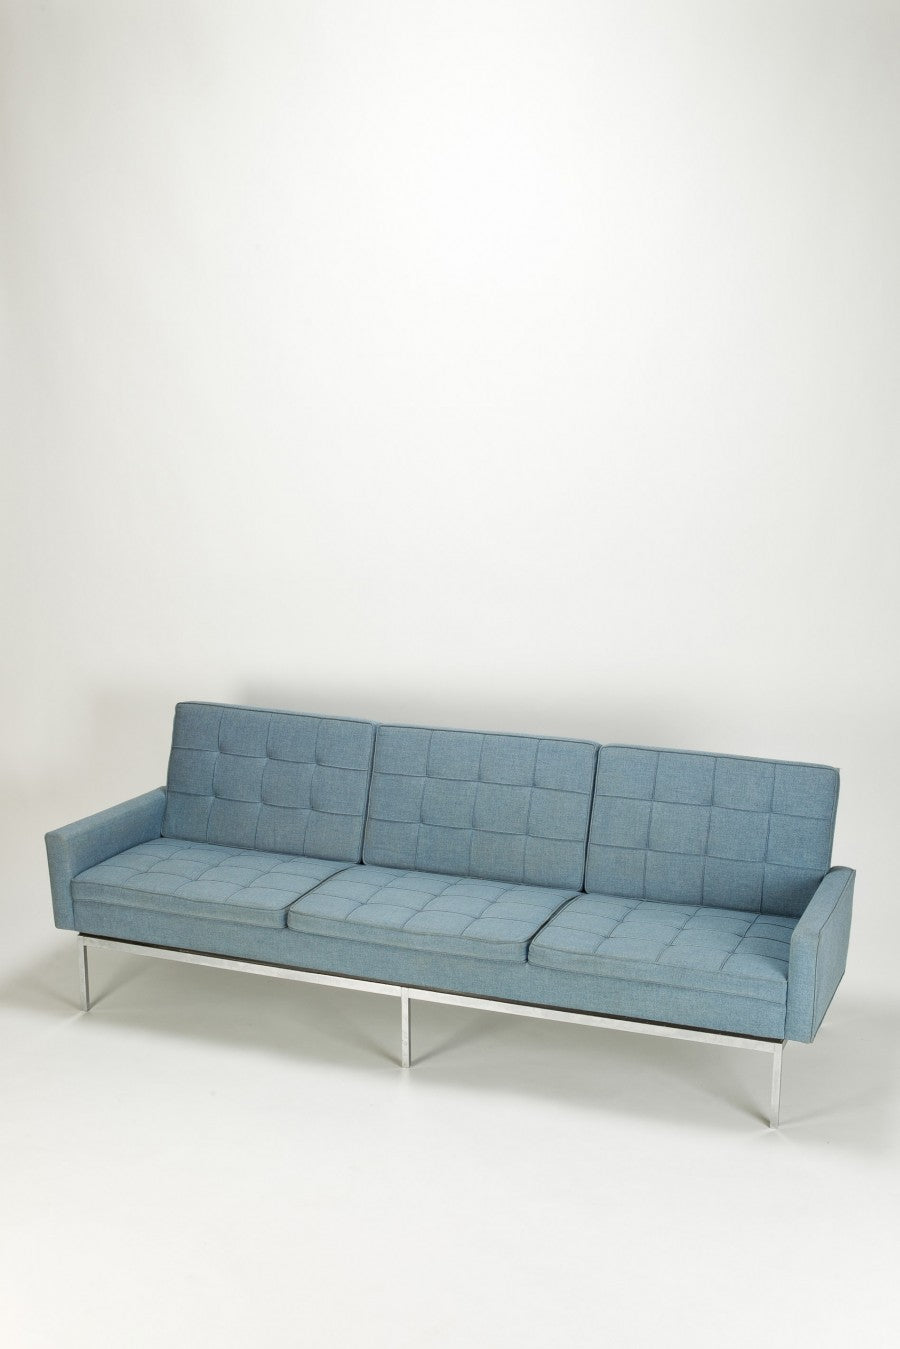 Florence Knoll Sofa Model 67A von Florence Knoll